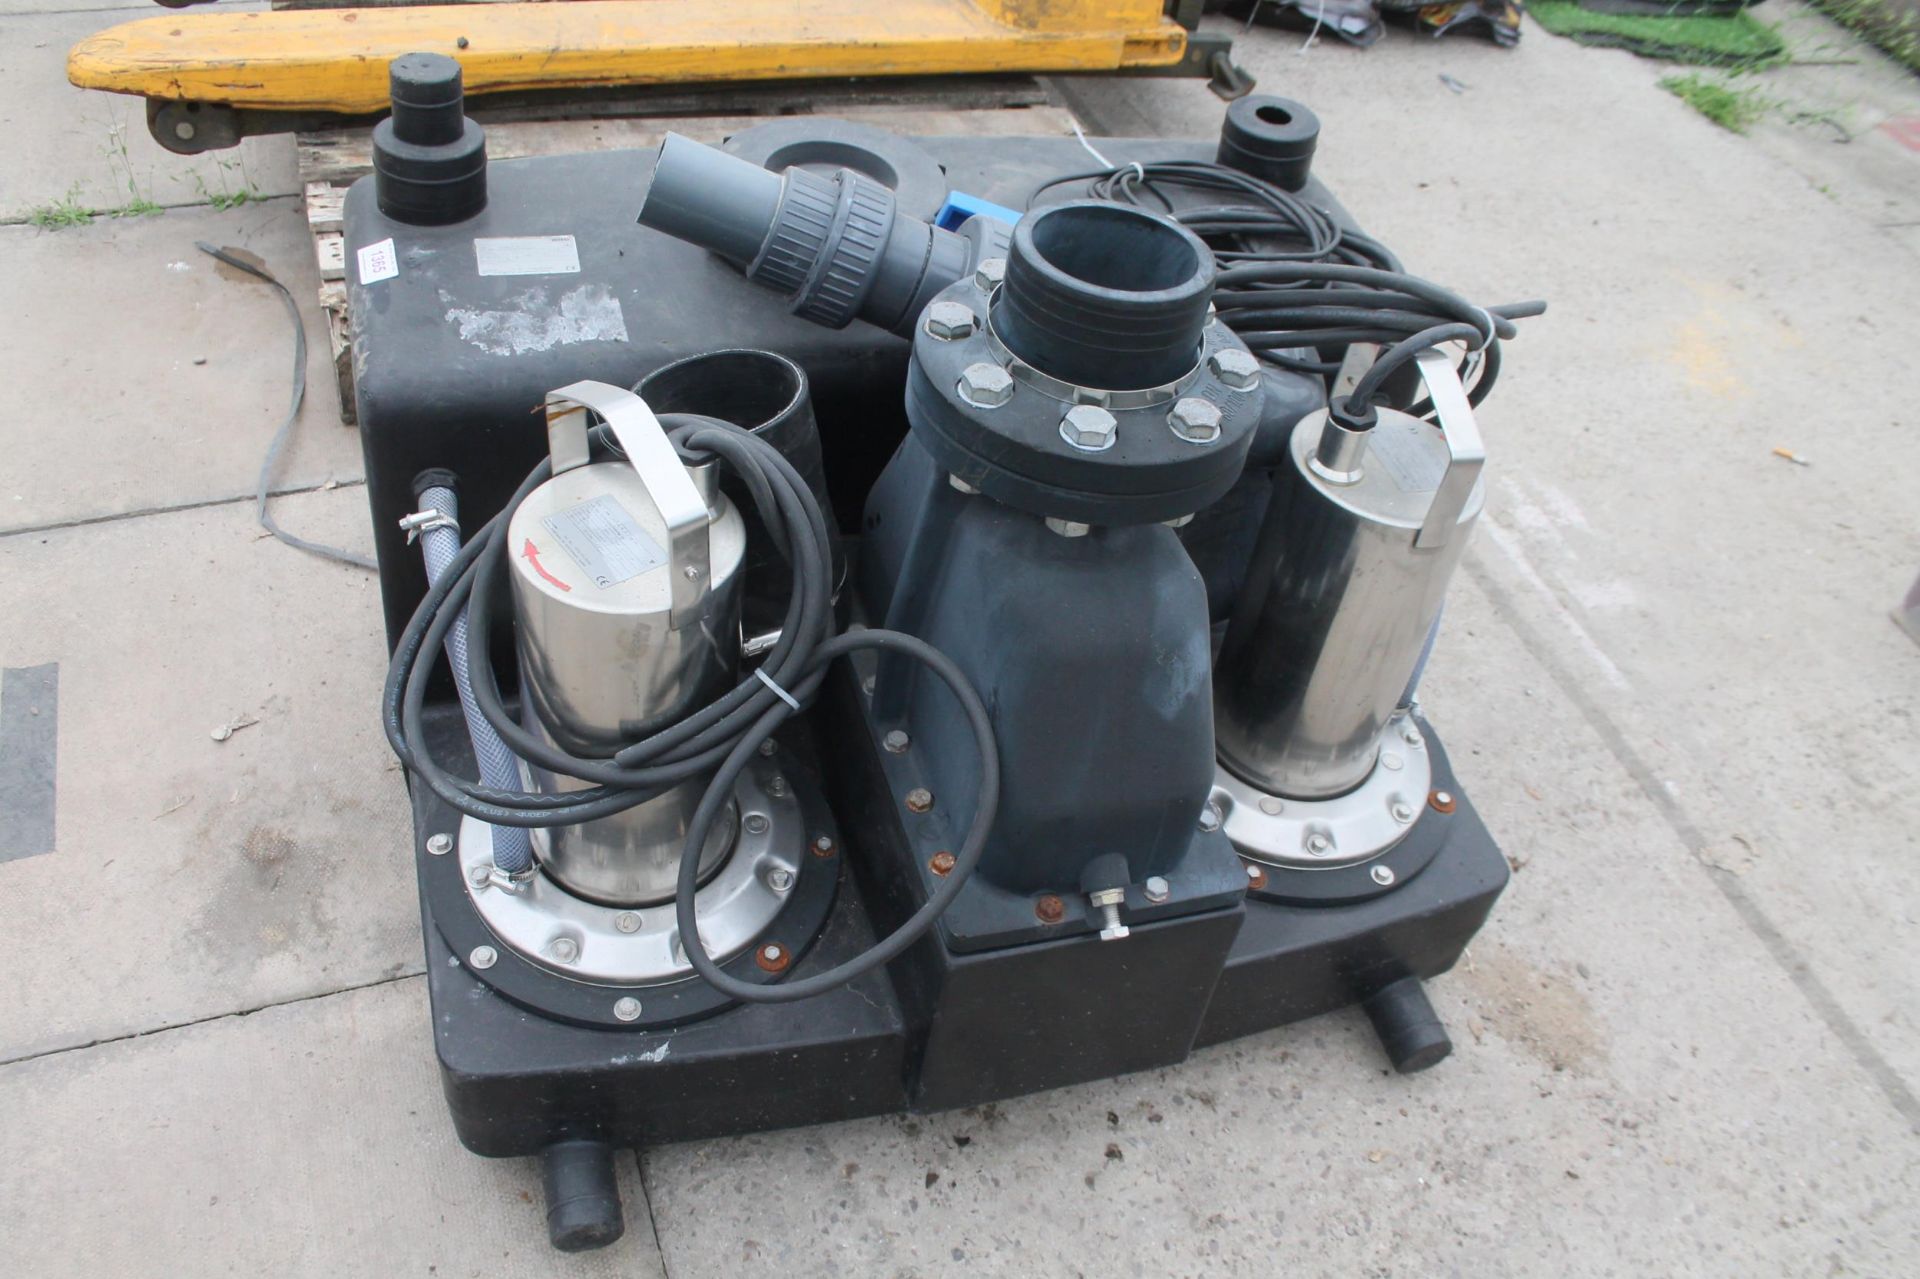 WILO DRAINLIFT M2-8 RV SEWAGE LIFTING UNIT 230V 50HZ , READY FOR CONNECTION SUBMERSIBLE AUTOMATIC